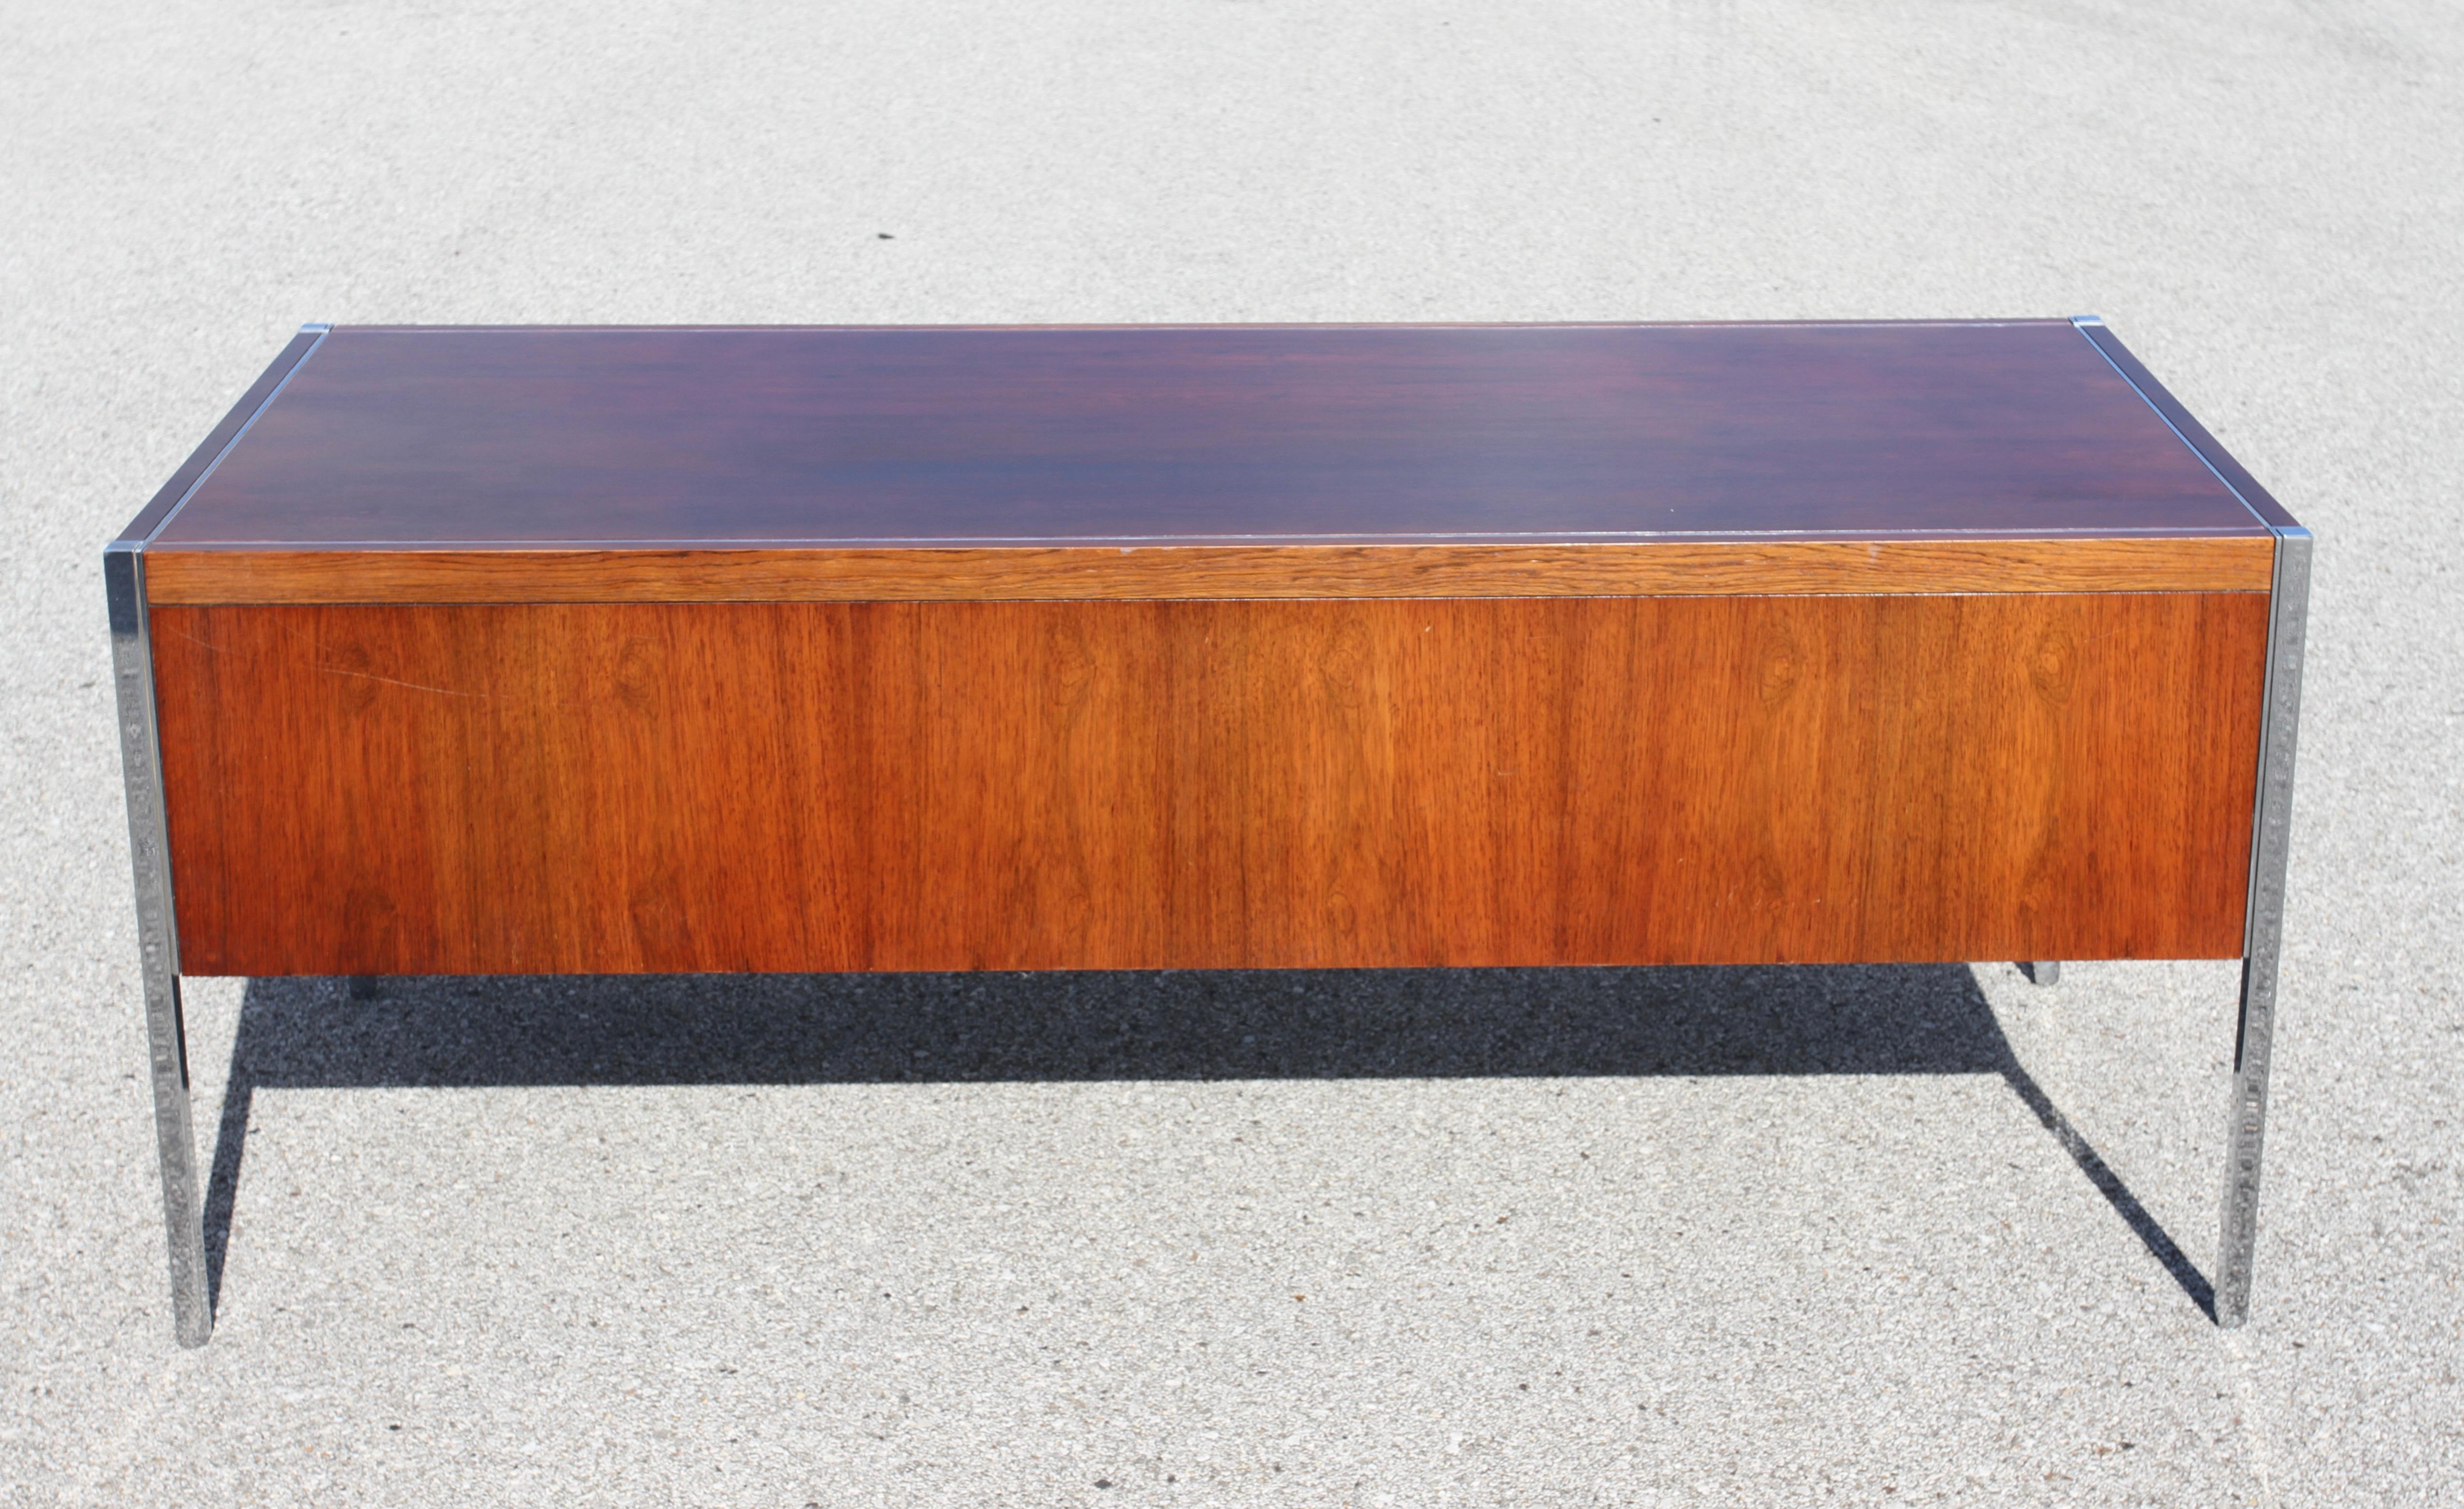 Richard Schultz for Knoll 1960s Mid-Century Modern Rosewood Executive Desk #4146 For Sale 7